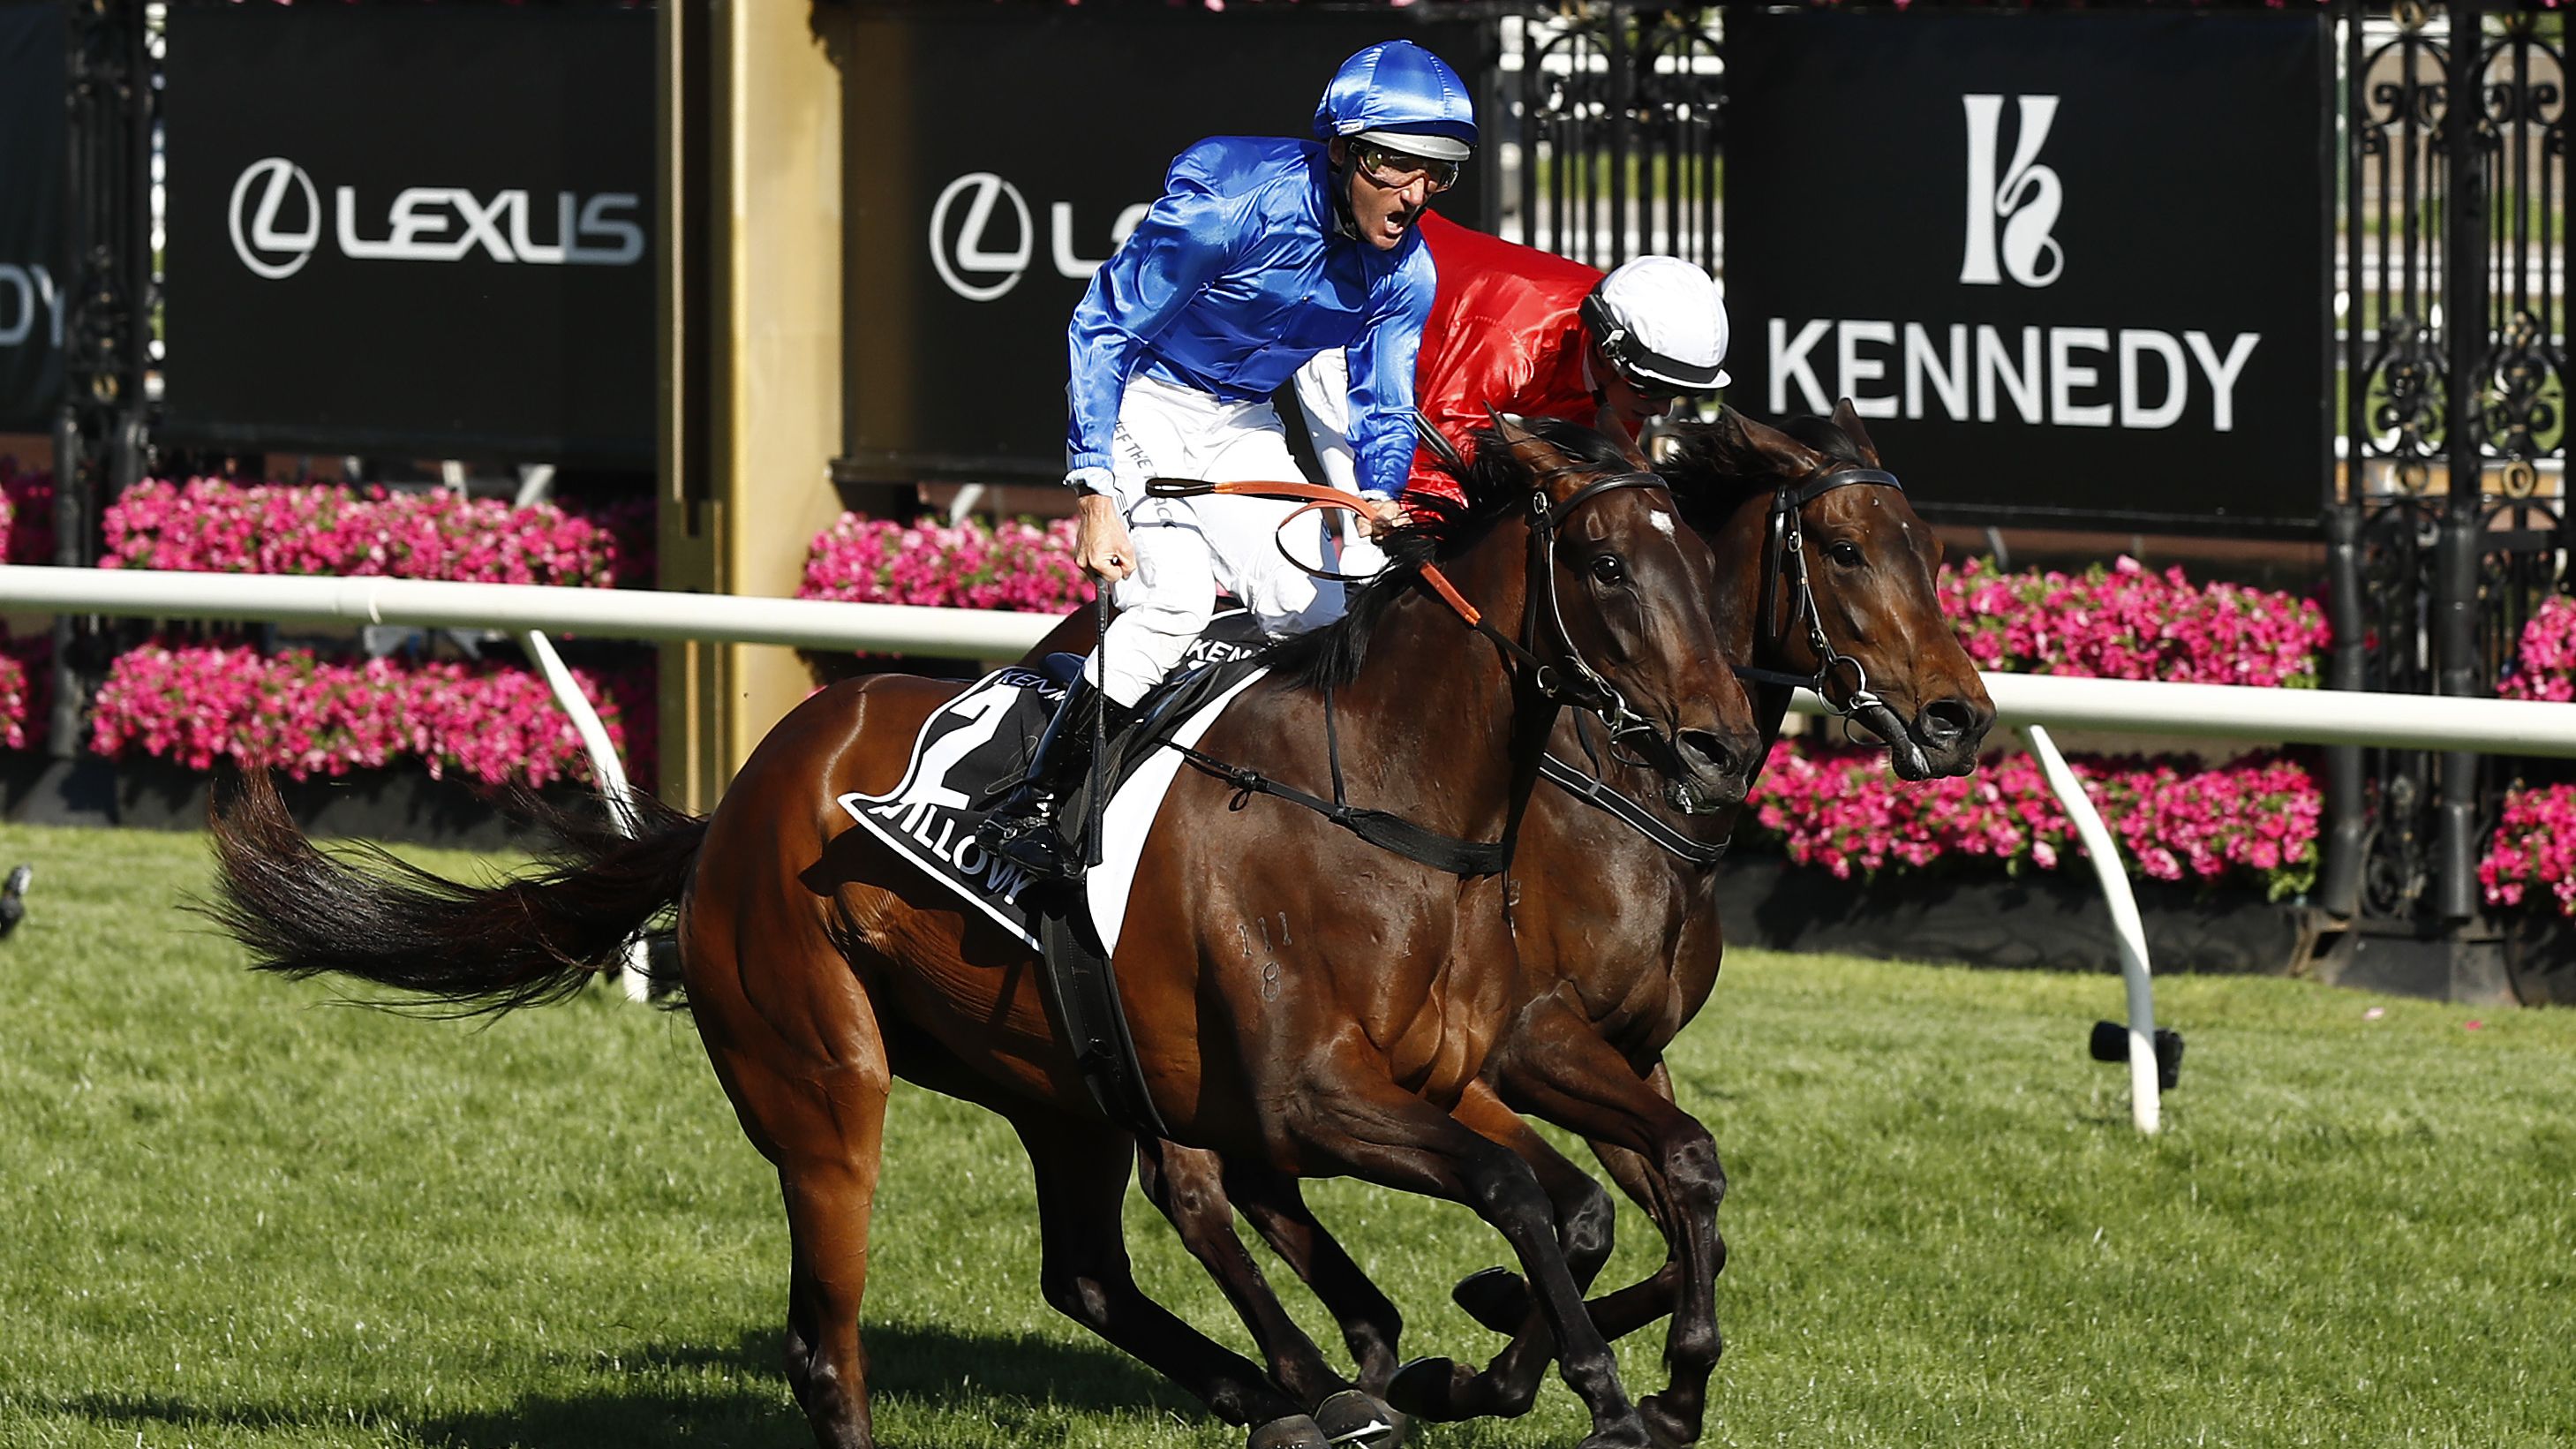 Australia's favourite jockey, Damien Oliver, reaches incredible record with another Oaks win